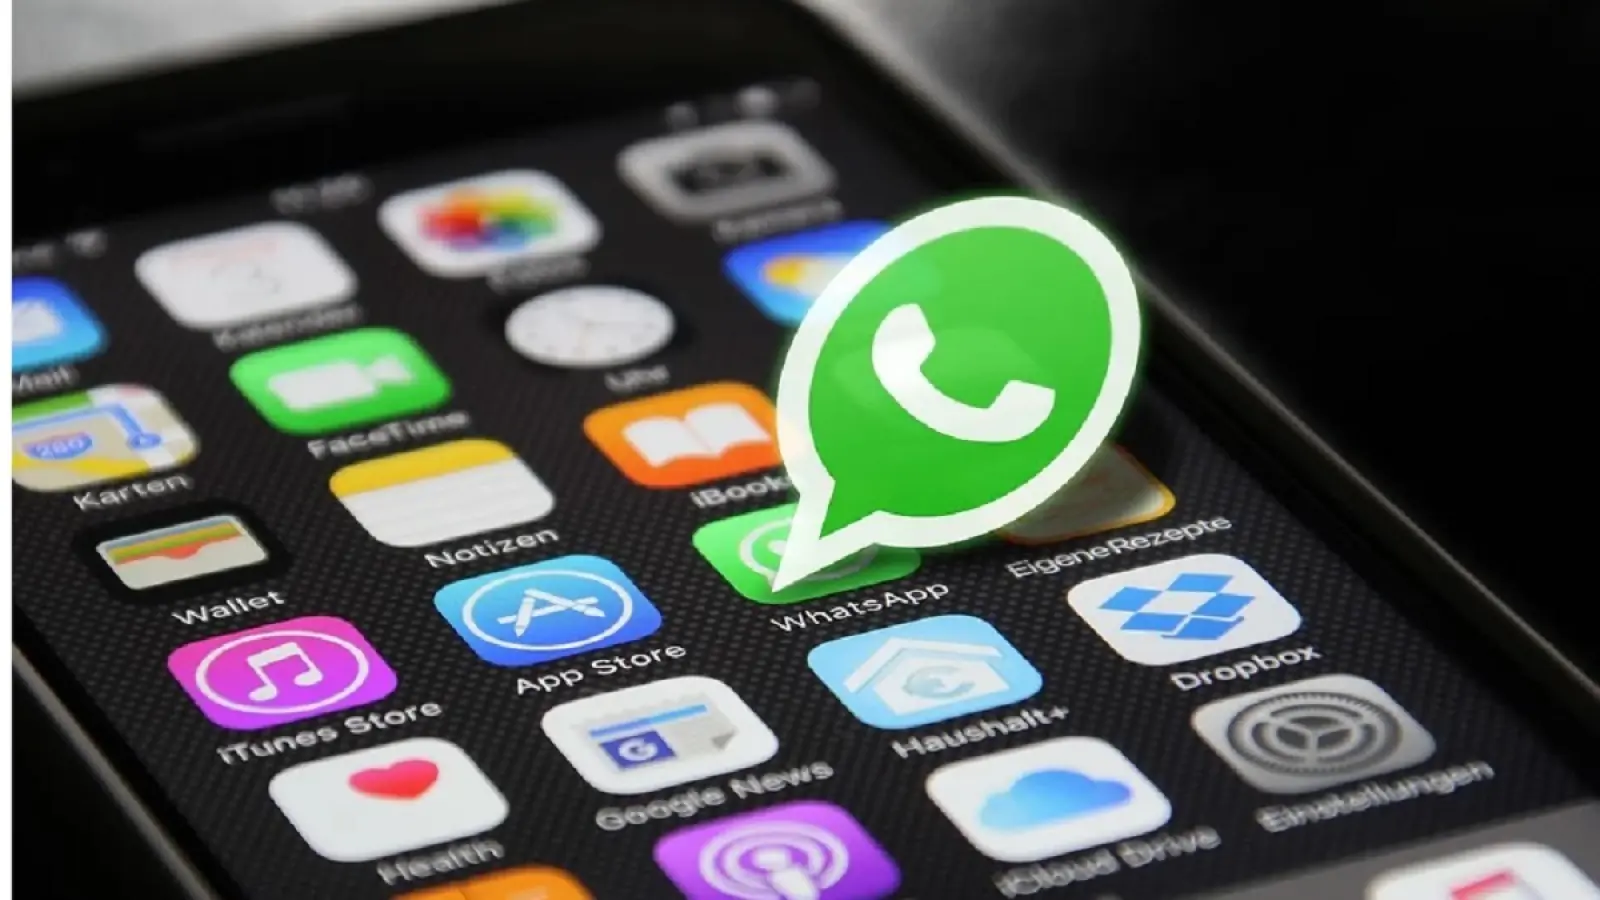 WhatsApp users will get more control over their status, the app is working on this new feature